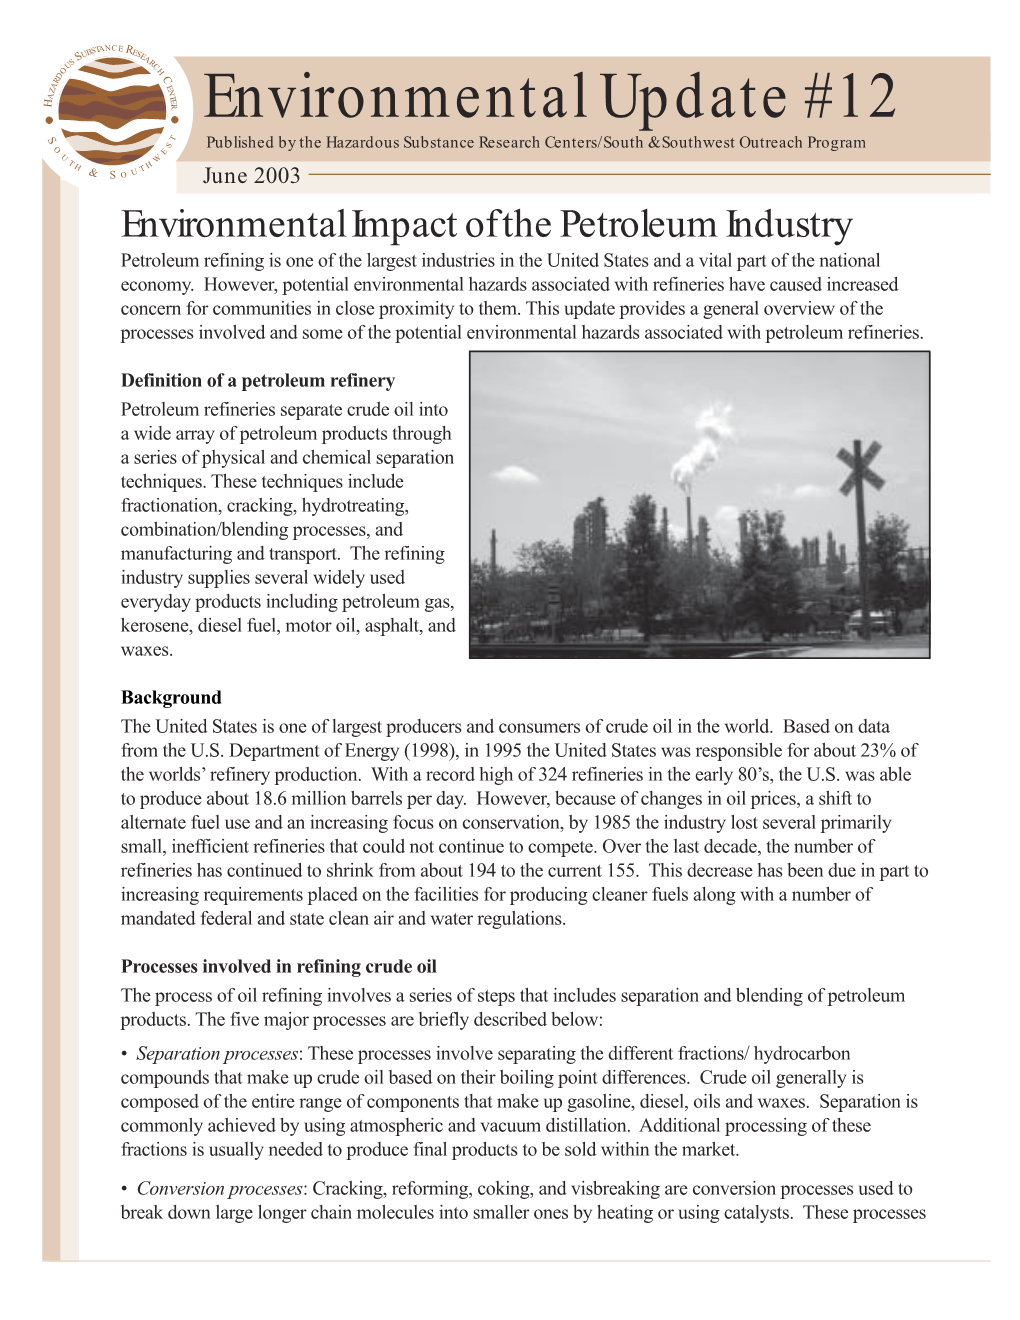 Environmental Impact of the Petroleum Industry Petroleum Refining Is One of the Largest Industries in the United States and a Vital Part of the National Economy